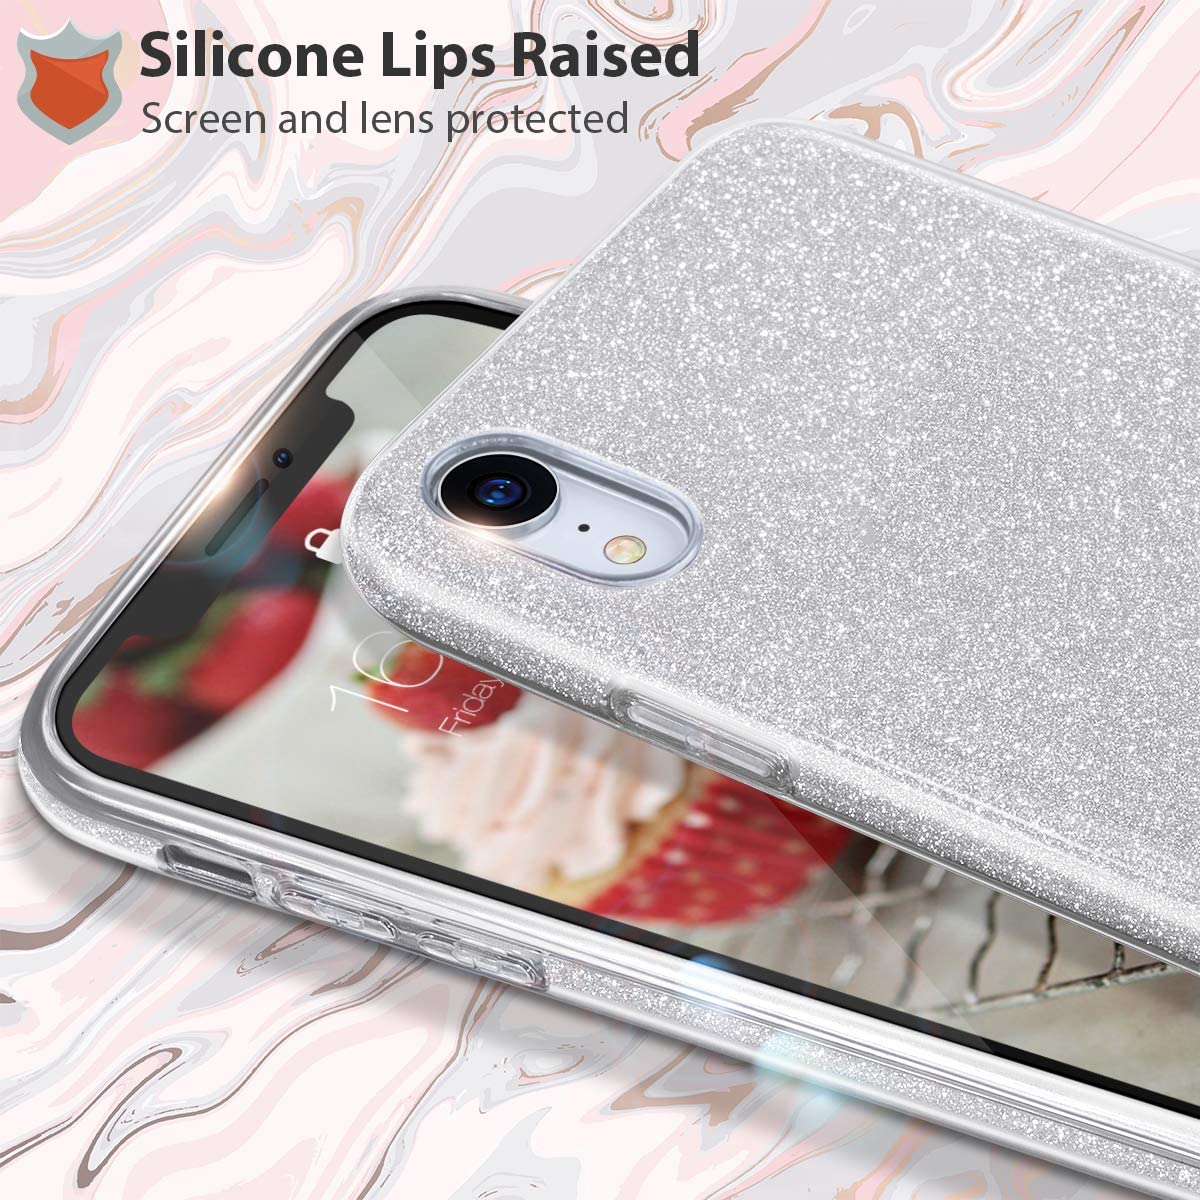 iPhone XR Case Clear Crystal Shiny Glitter Sparkly Bling Cute Thin Slim Girls Case for iPhone XR 6.1''(Silver) - e4cents